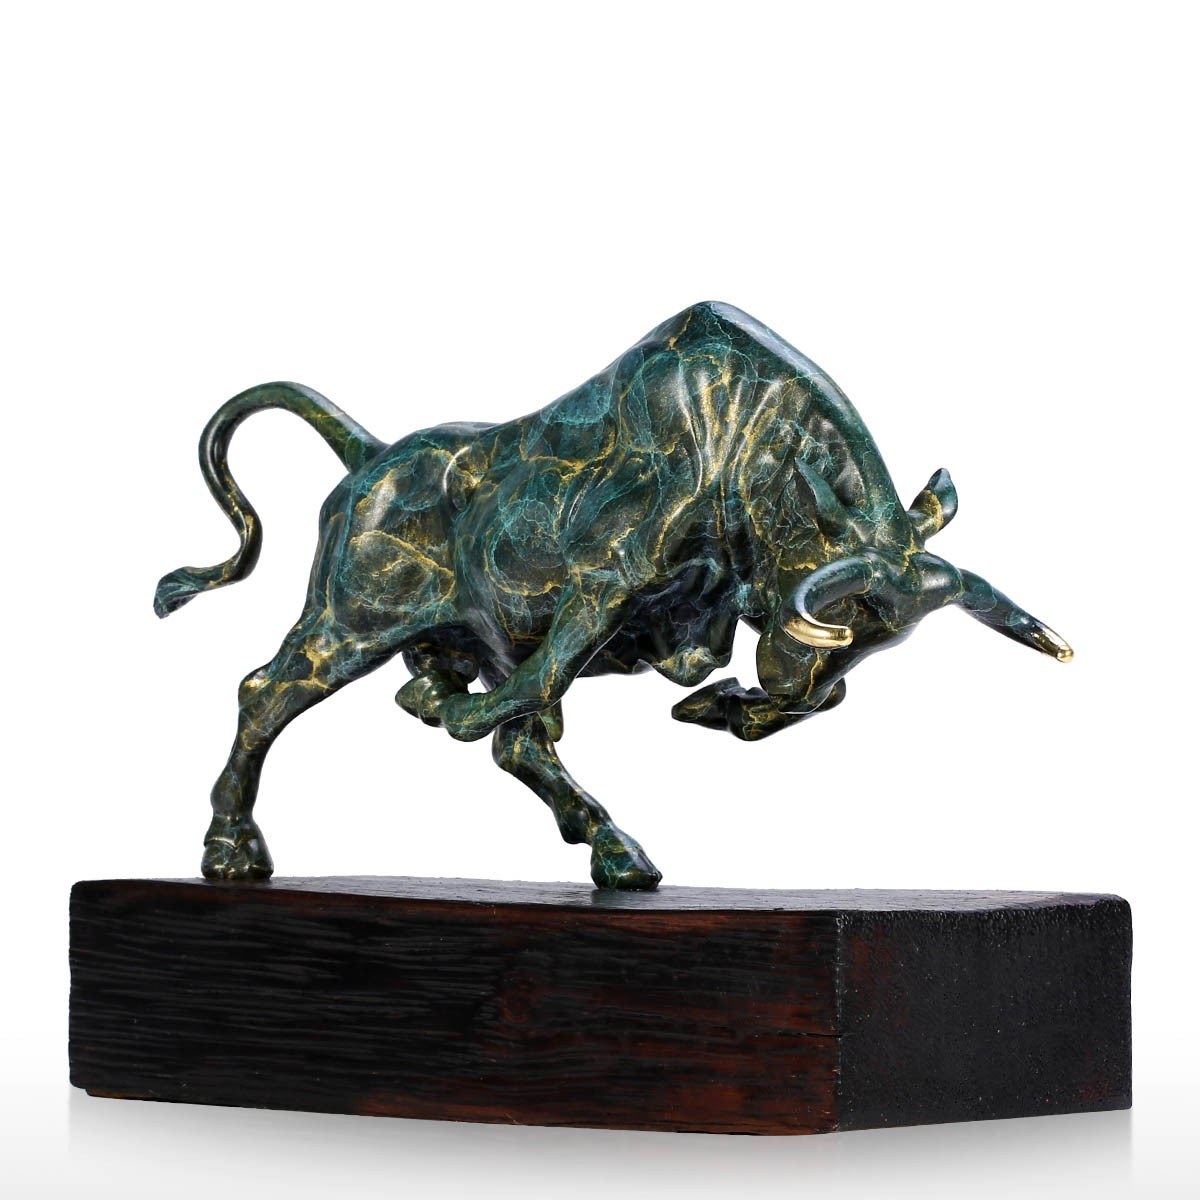 Charging Bull Statue and Wall Street Bull Statue with Bronze Bull Statue for Sale